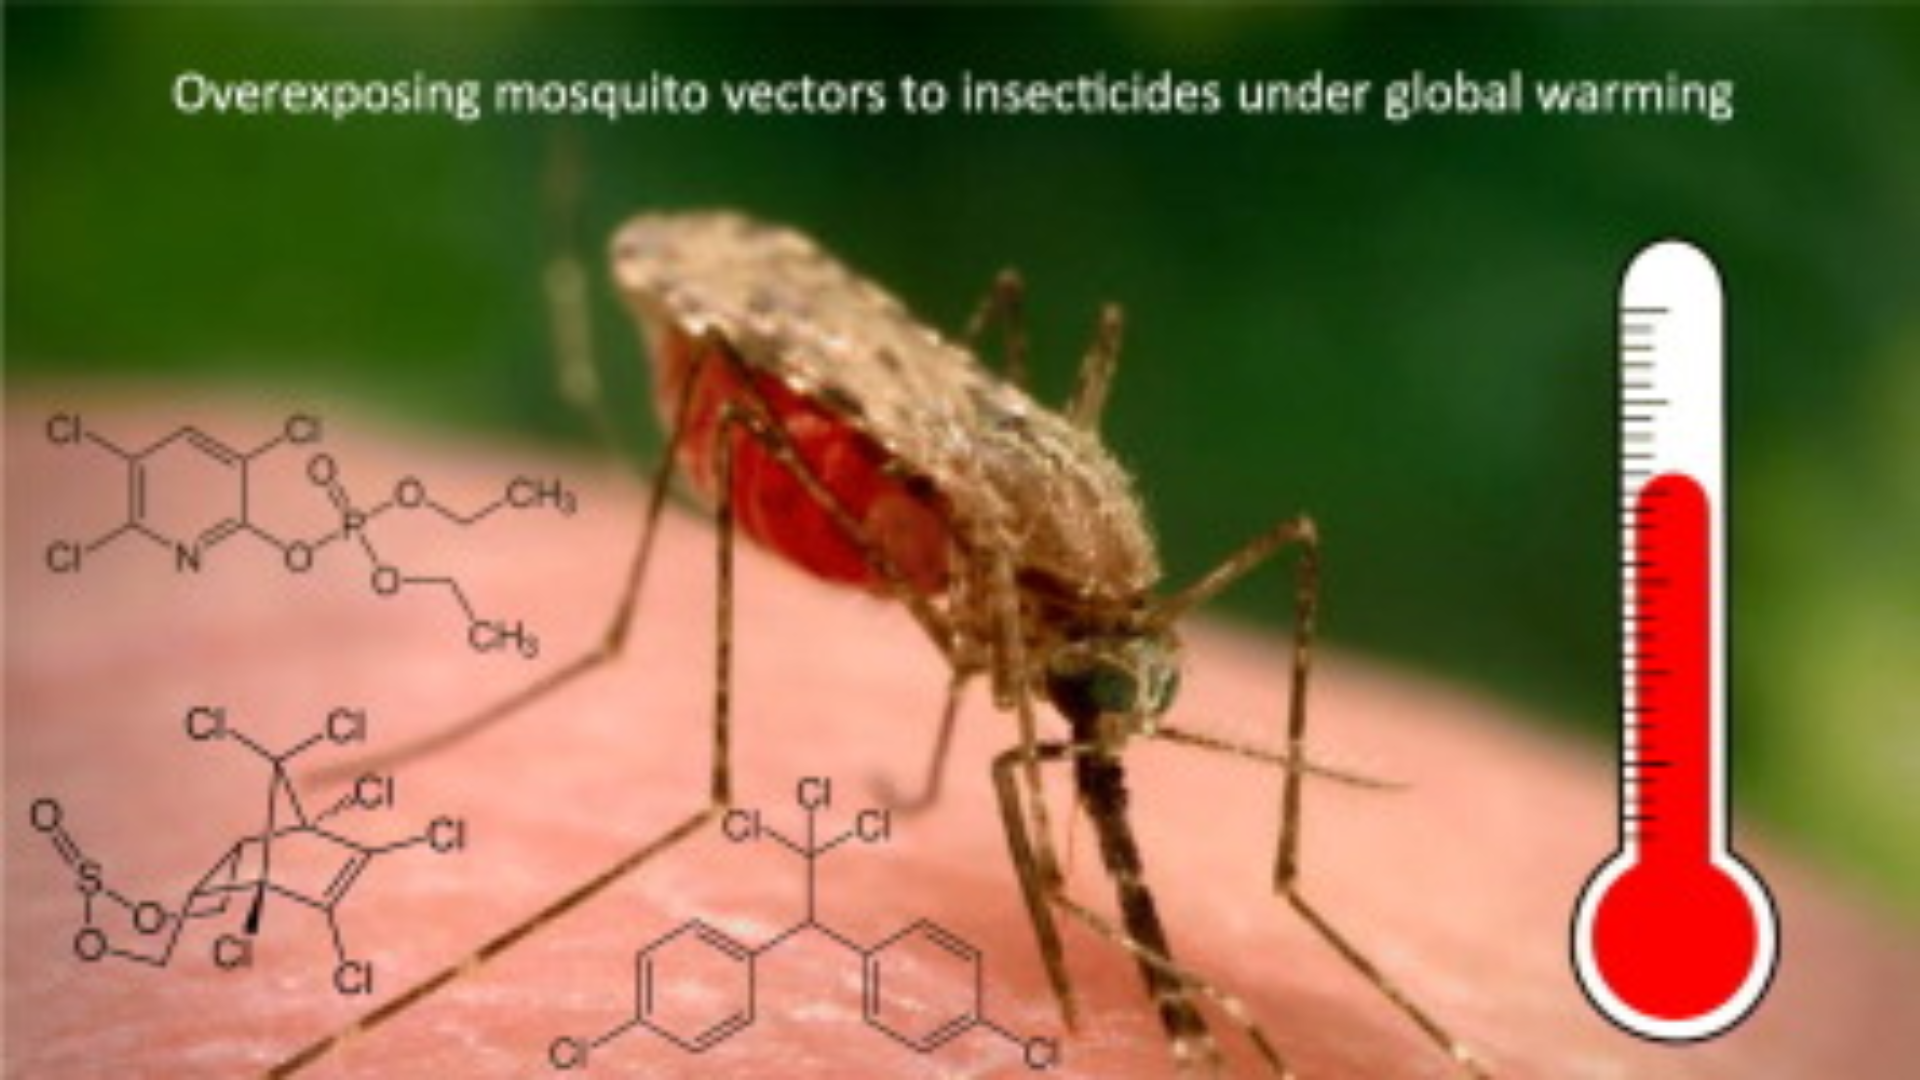 An increase of mosquitoes due to warmer temperatures brought on by climate change